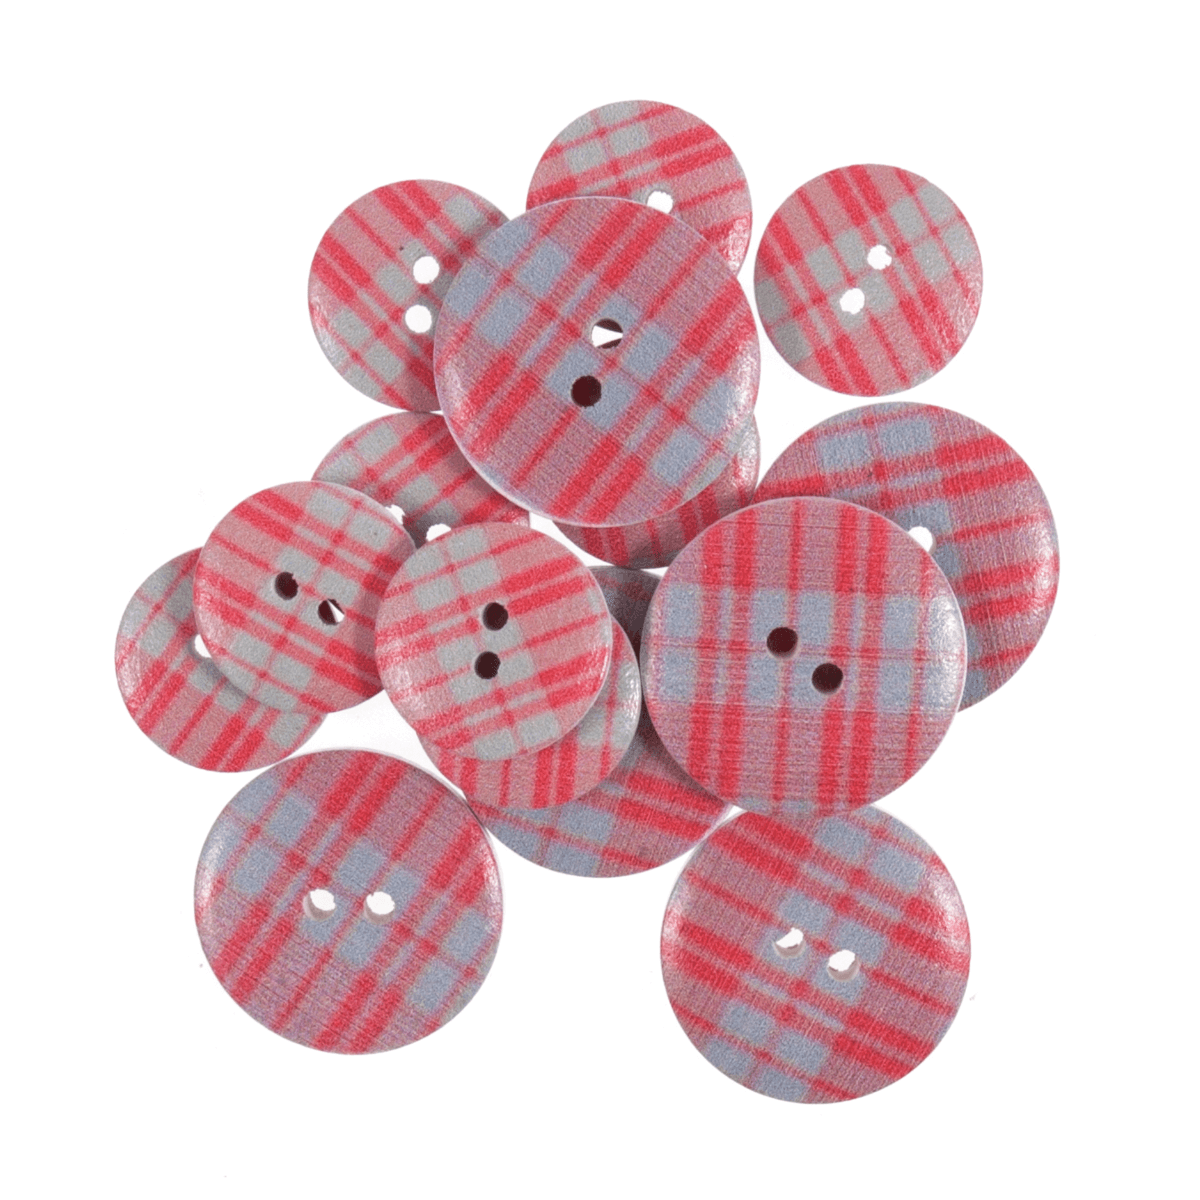 15 x Assorted Red Line Stripe Wooden Craft Buttons 18mm - 25mm 